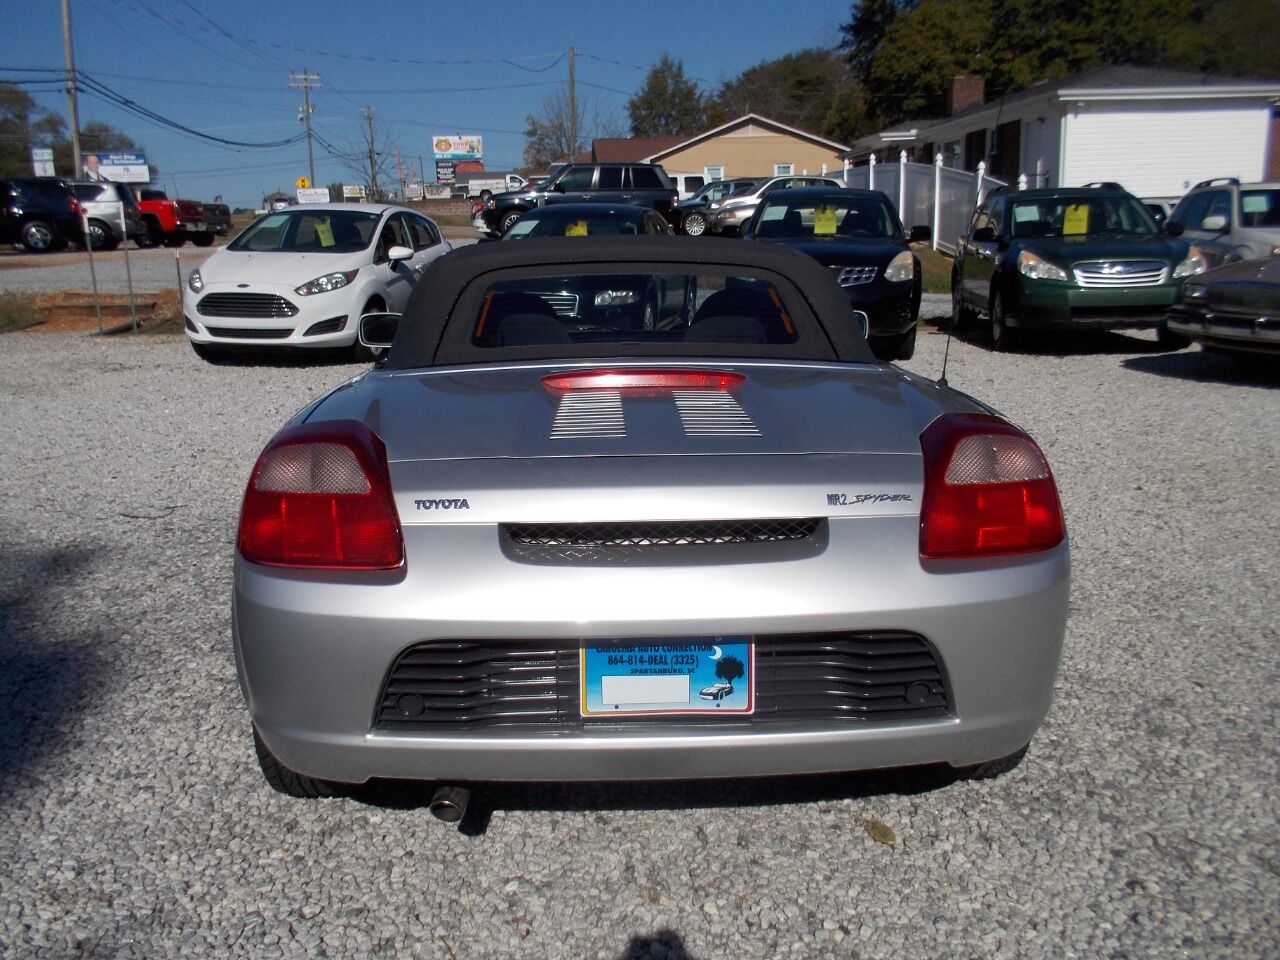 Preowned 2001 TOYOTA MR2 Base 2dr Convertible for sale by Carolina Auto Connection in Spartanburg, SC